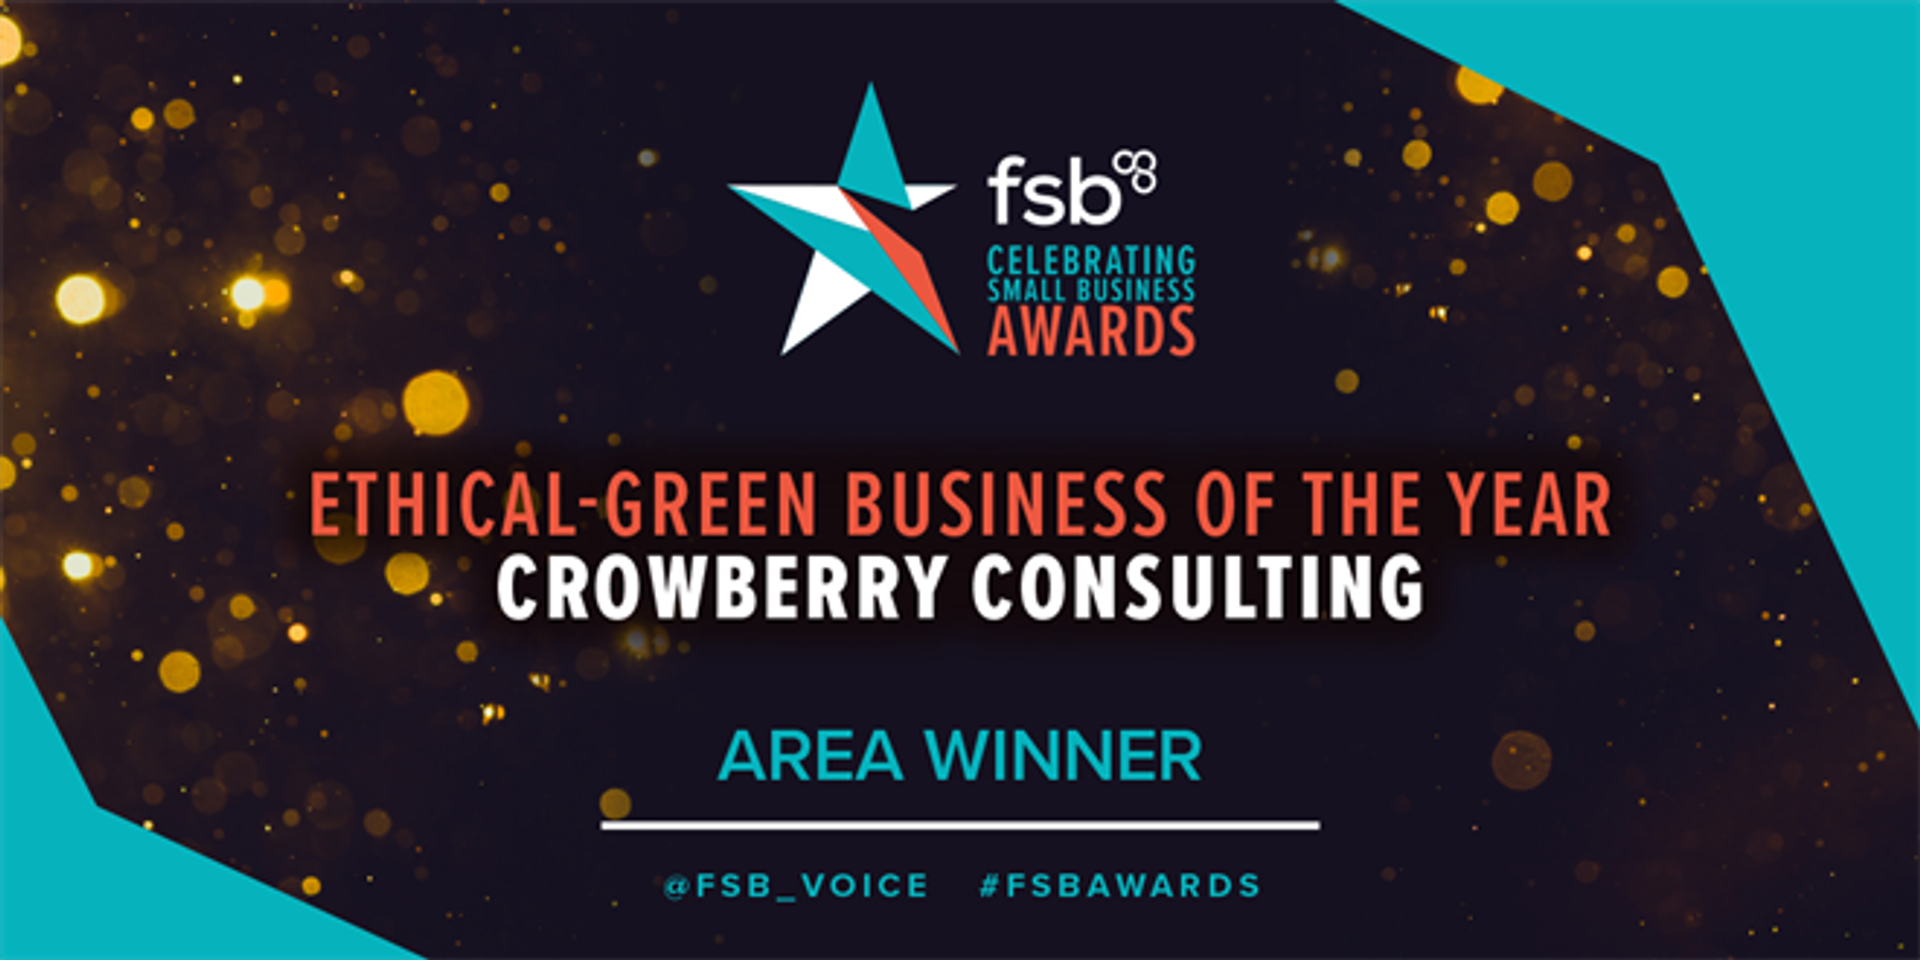 Crowberry Consulting